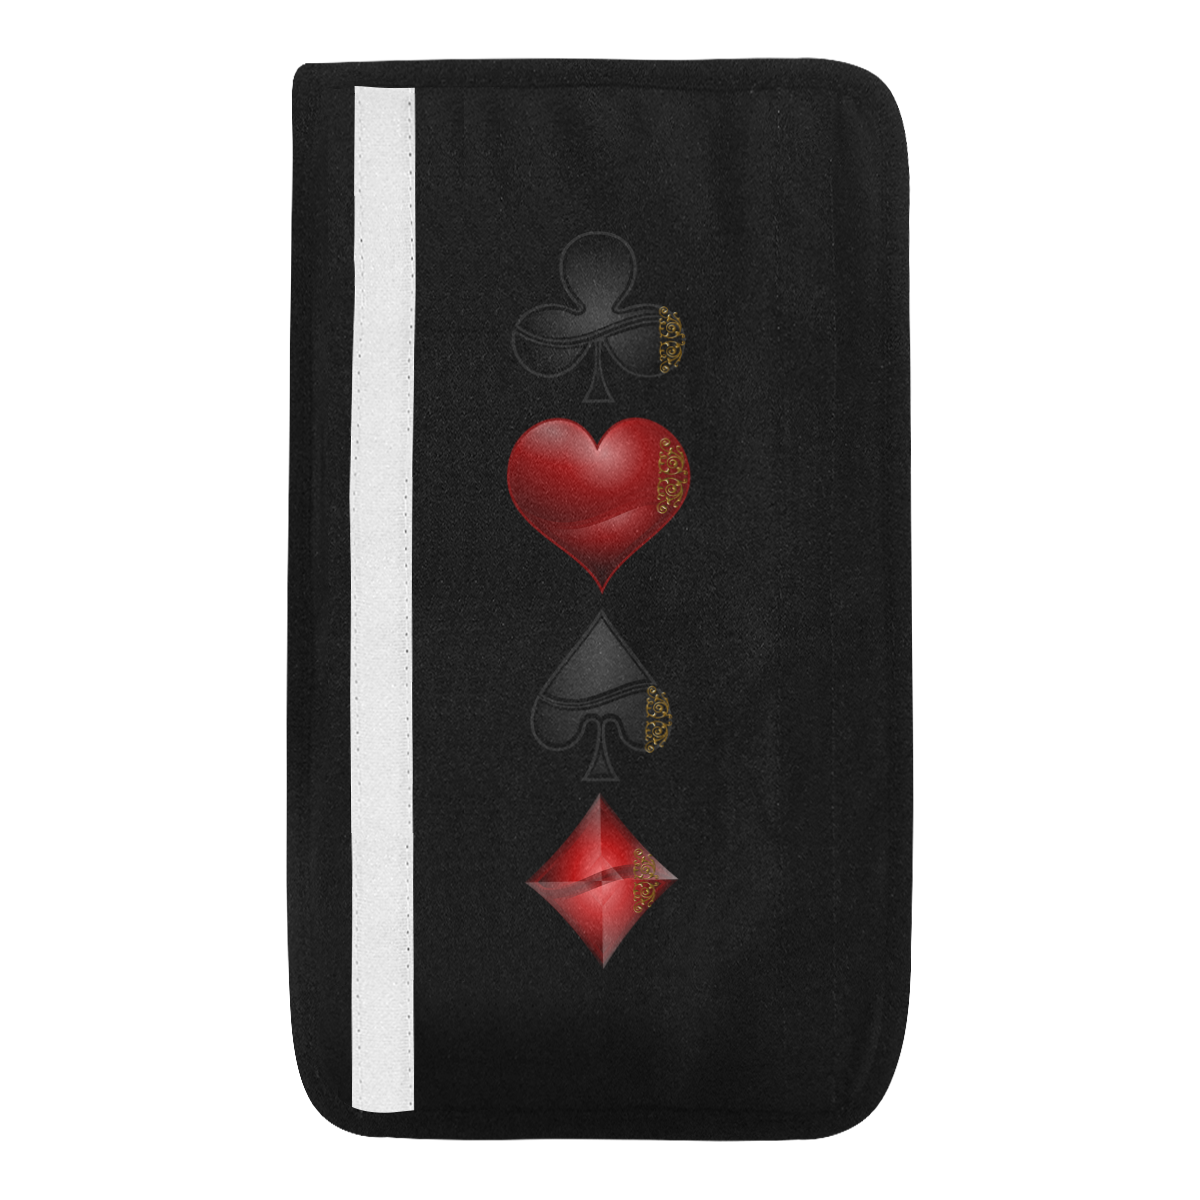 Las Vegas  Black and Red Casino Poker Card Shapes on Black Car Seat Belt Cover 7''x12.6''